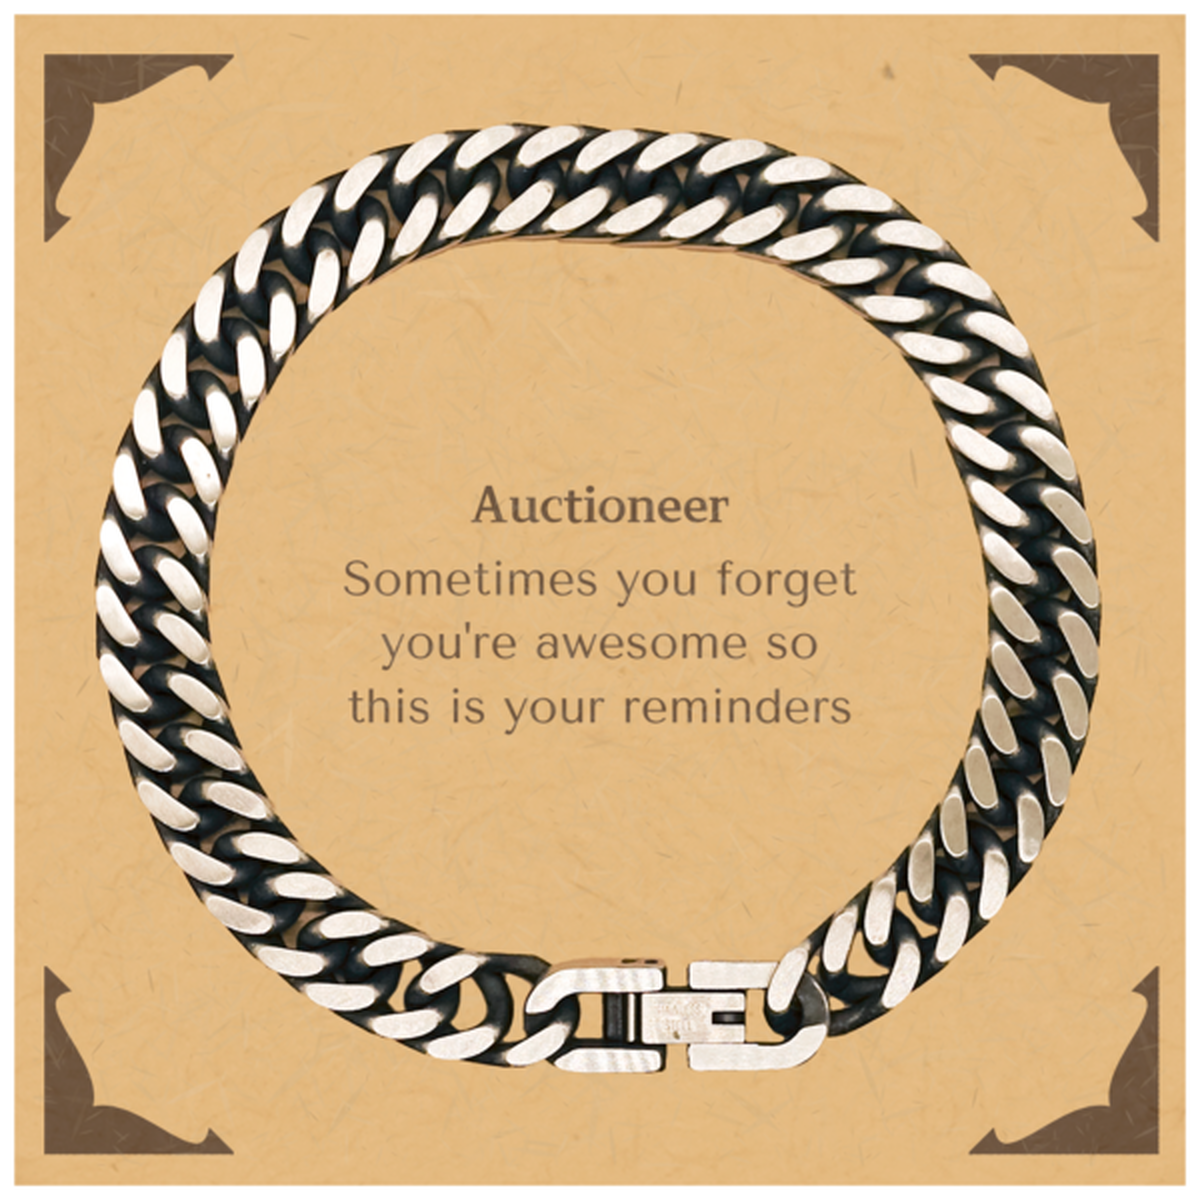 Sentimental Auctioneer Cuban Link Chain Bracelet, Auctioneer Sometimes you forget you're awesome so this is your reminders, Graduation Christmas Birthday Gifts for Auctioneer, Men, Women, Coworkers